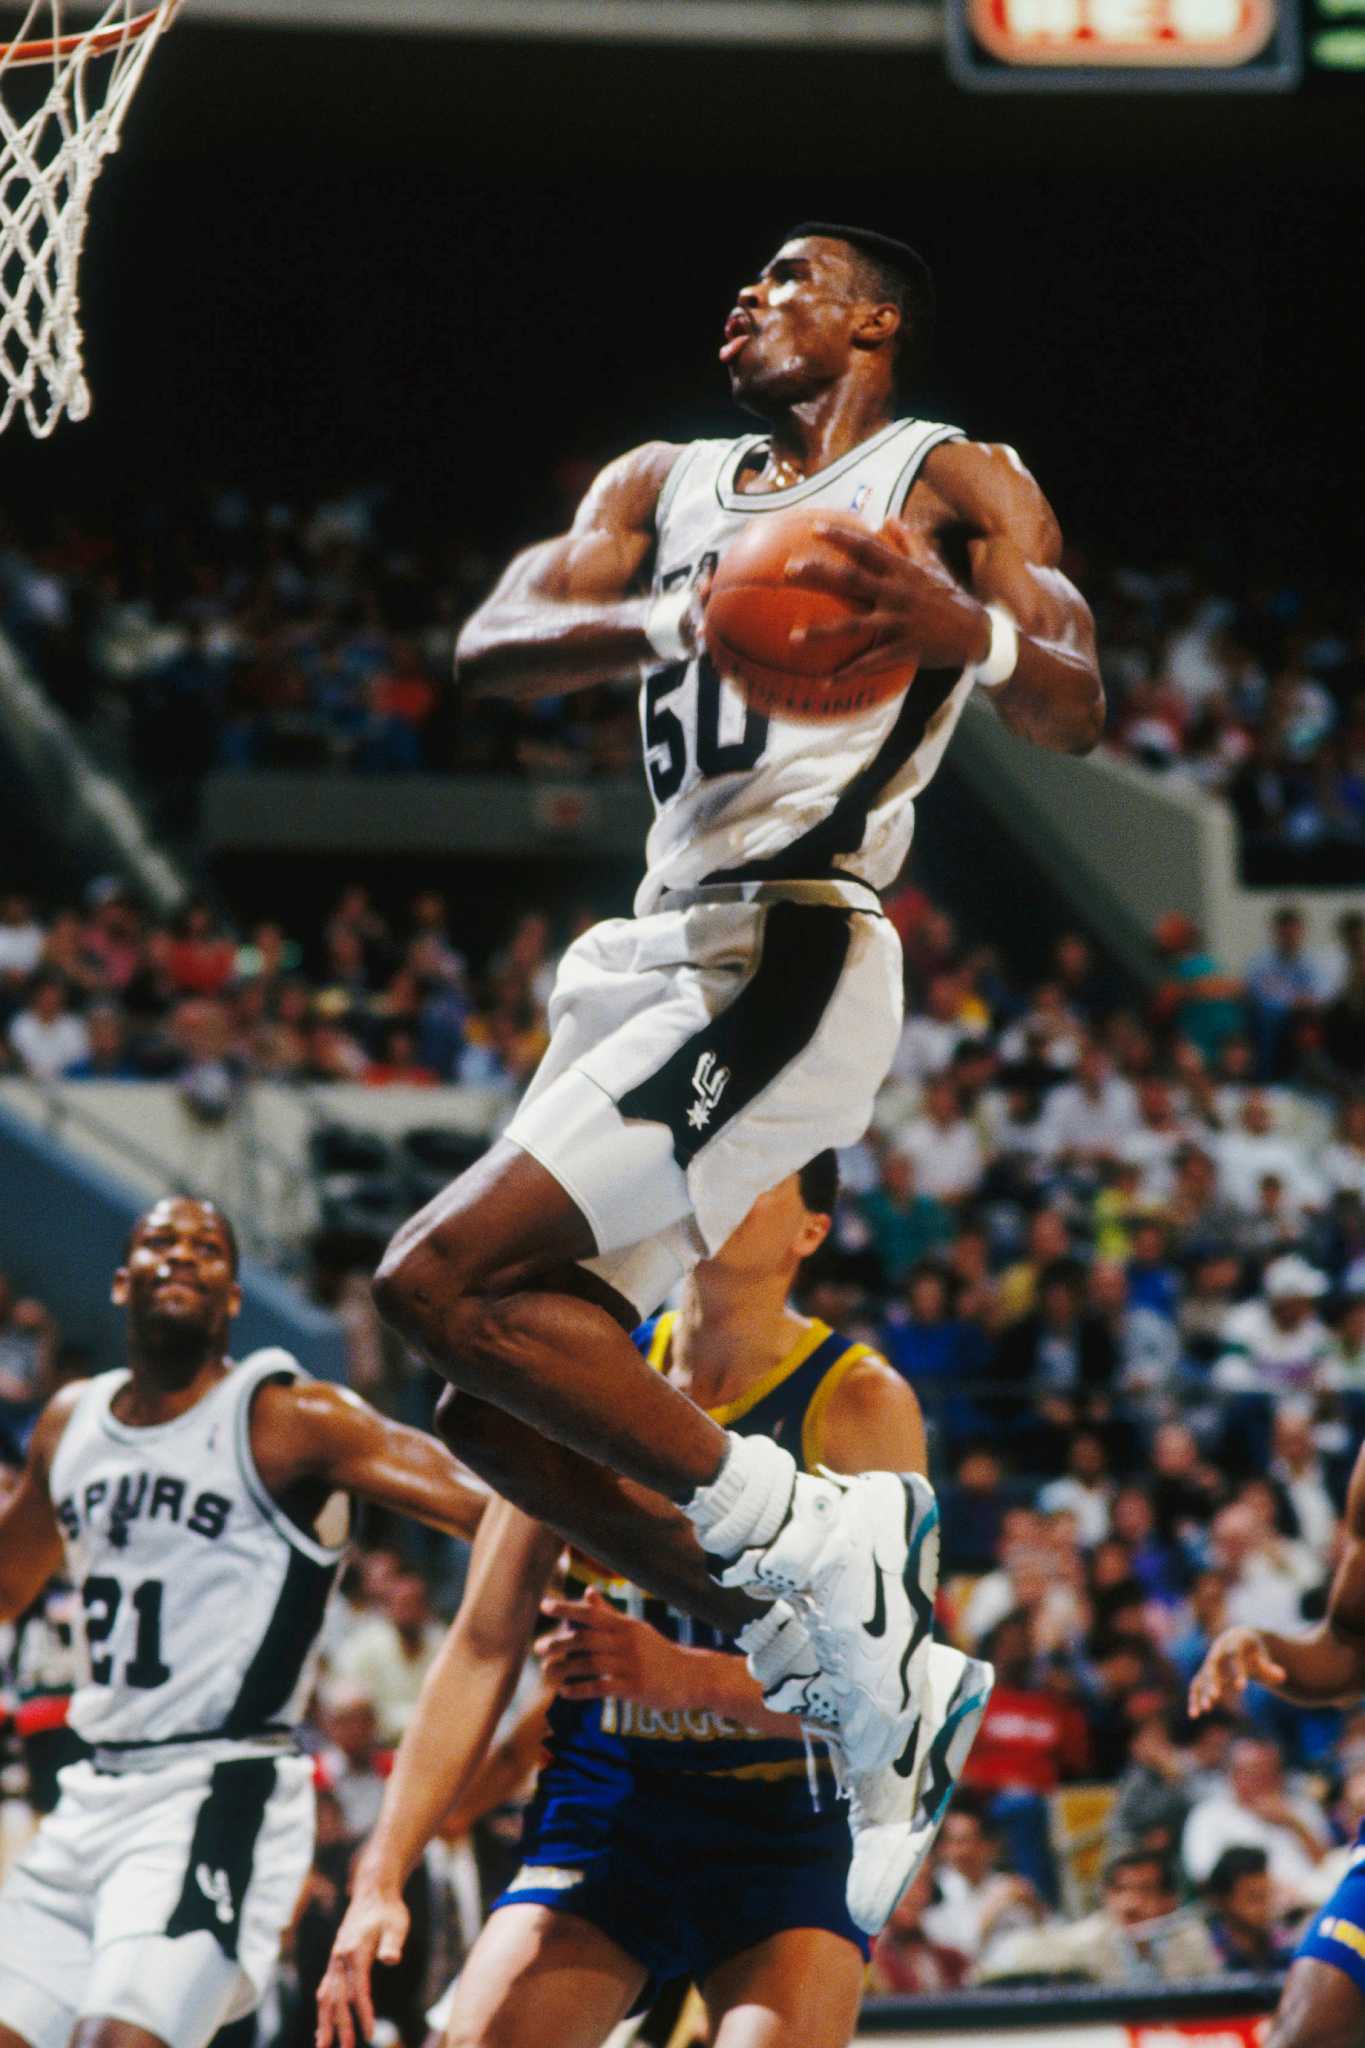 Spurs great David Robinson to serve as honorary chair of Gurwitz